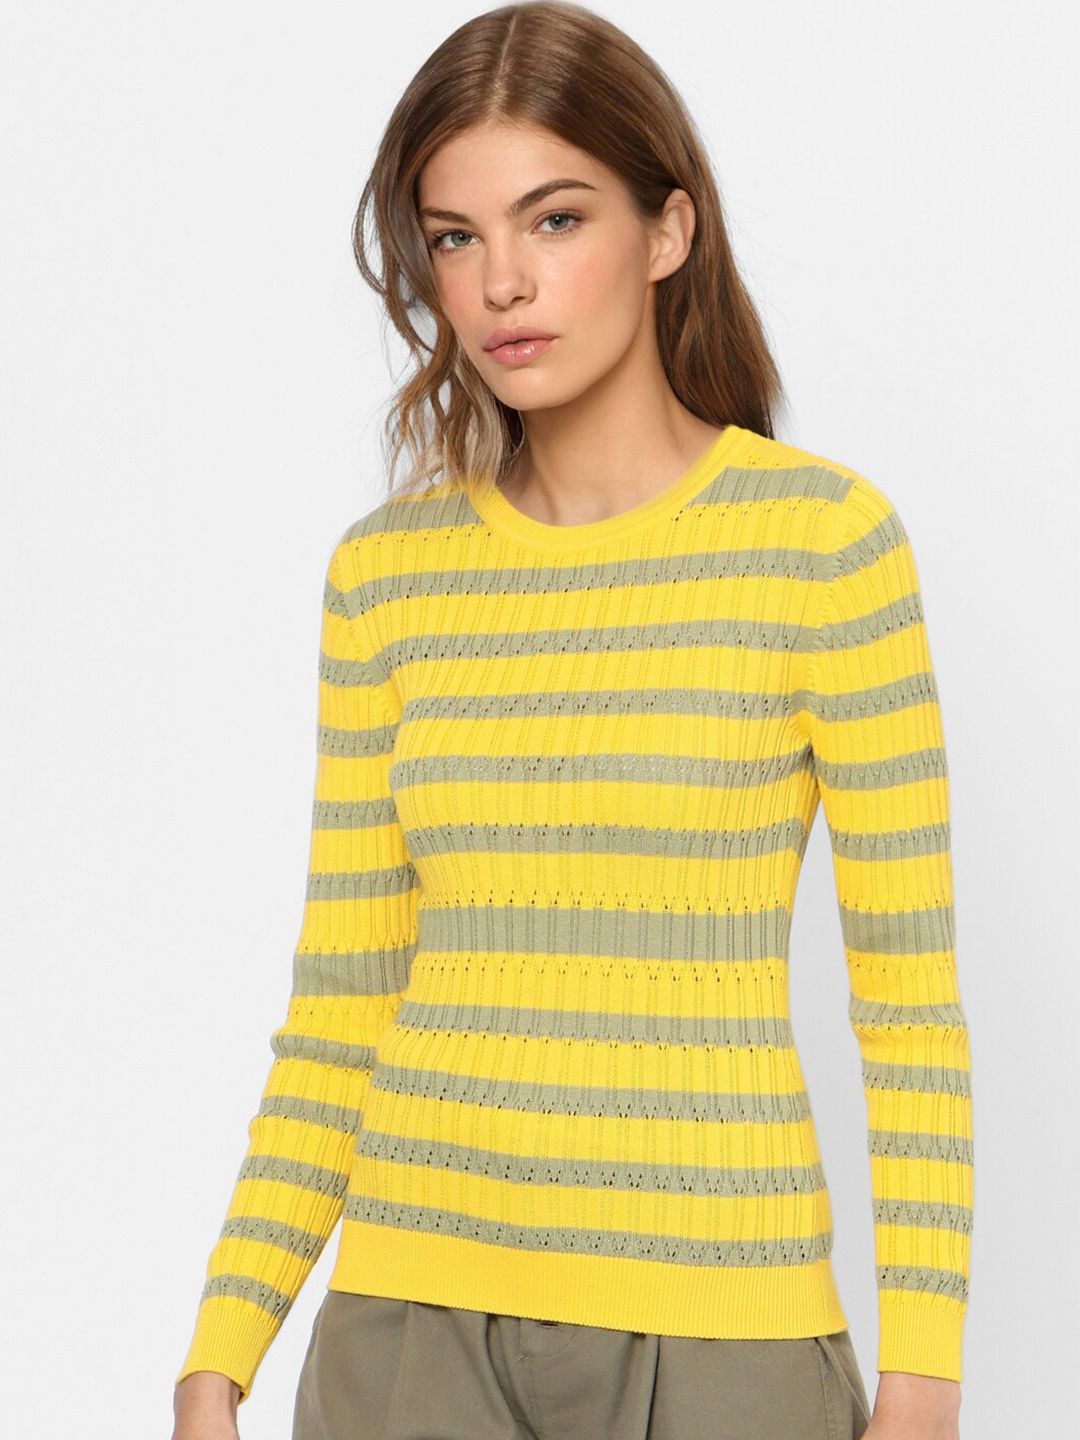 ONLY Women Yellow & Grey Striped Pullover Price in India